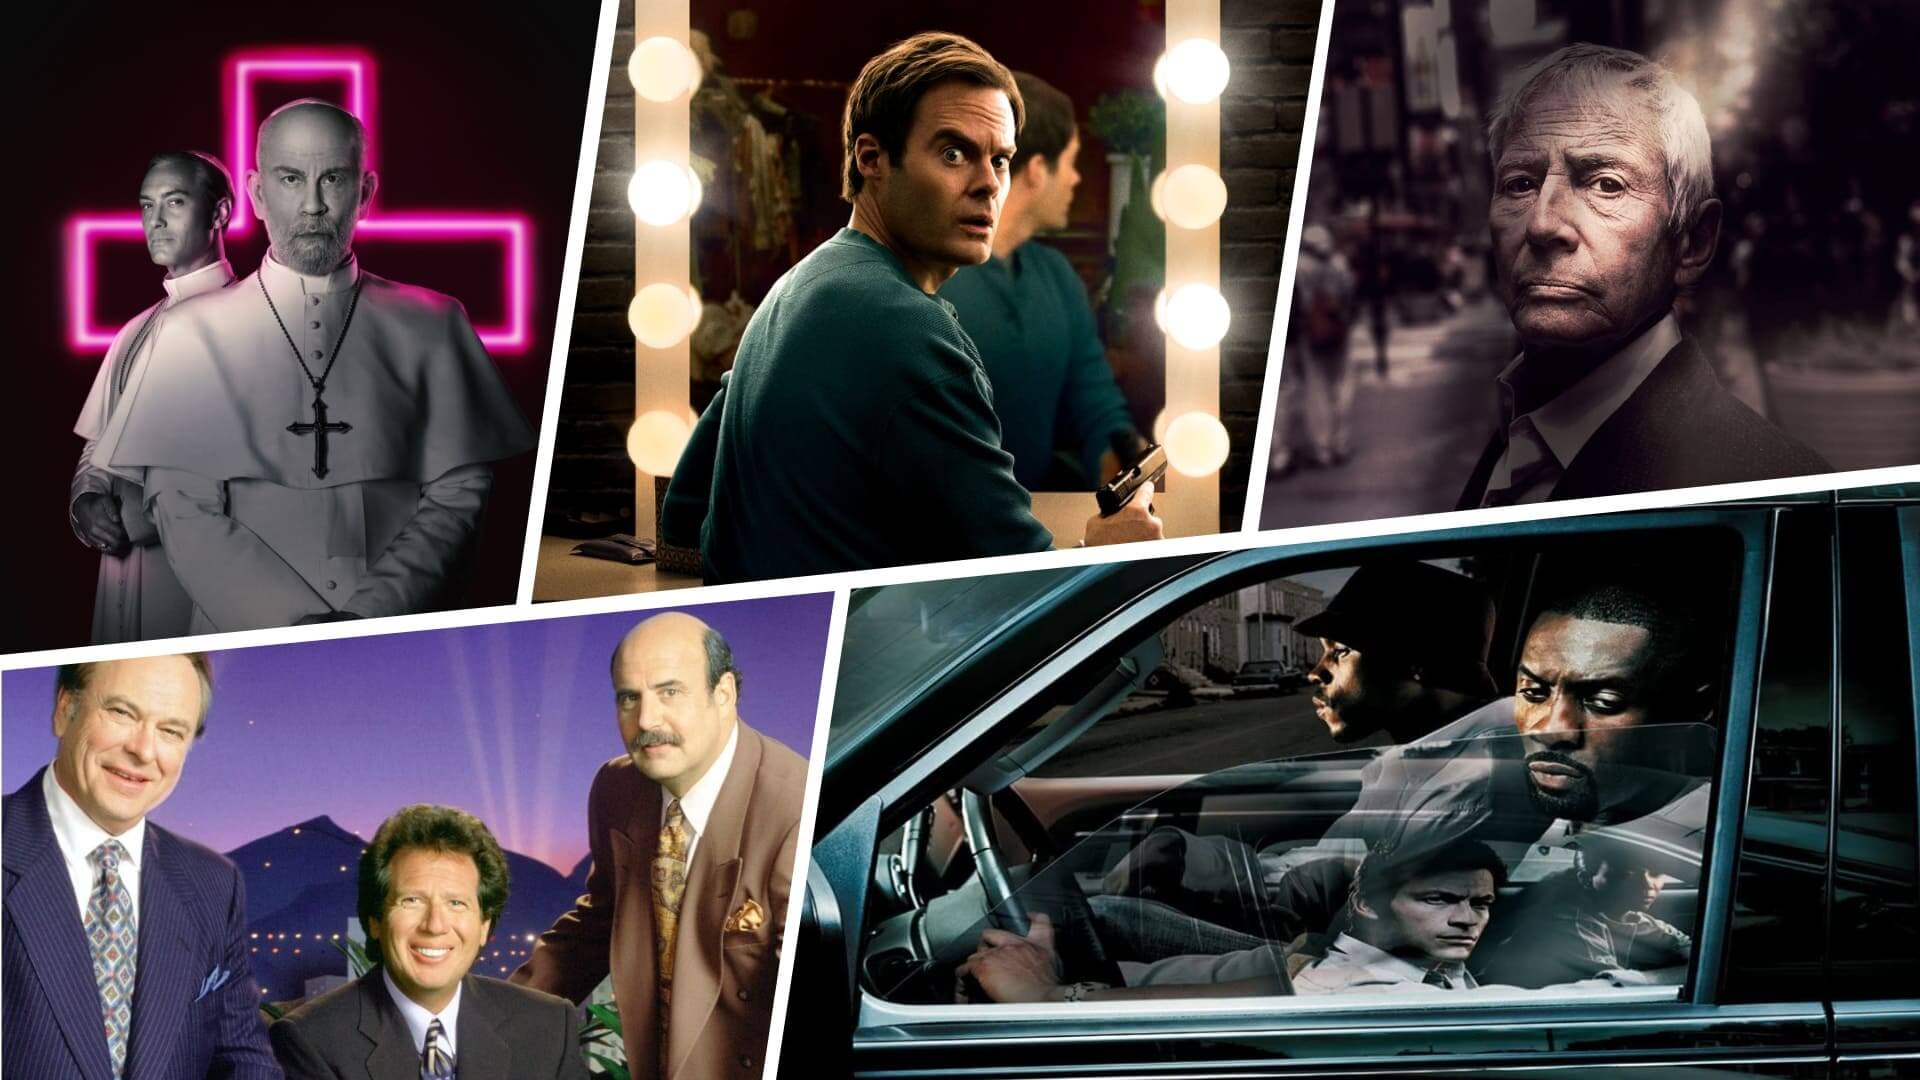 The Best Shows on HBO (Nov 2020) - Featured